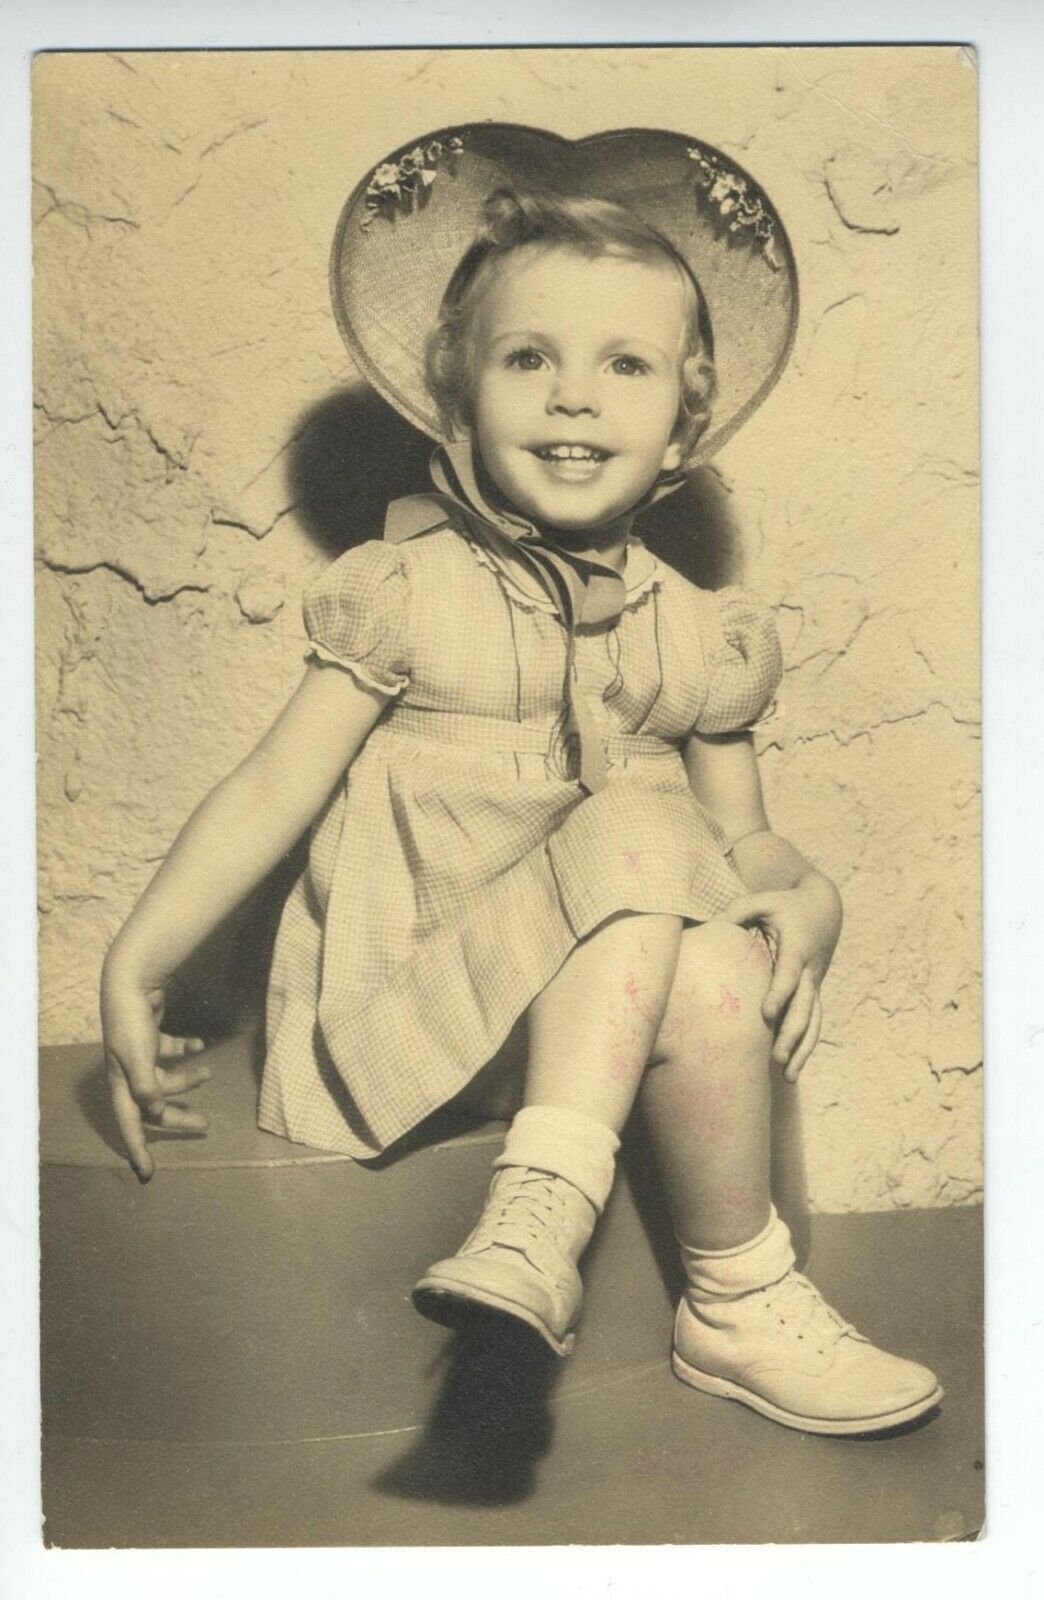 VERY YOUNG Child Actor BABY SANDY RARE -  Signed RPPC inch photo  1941